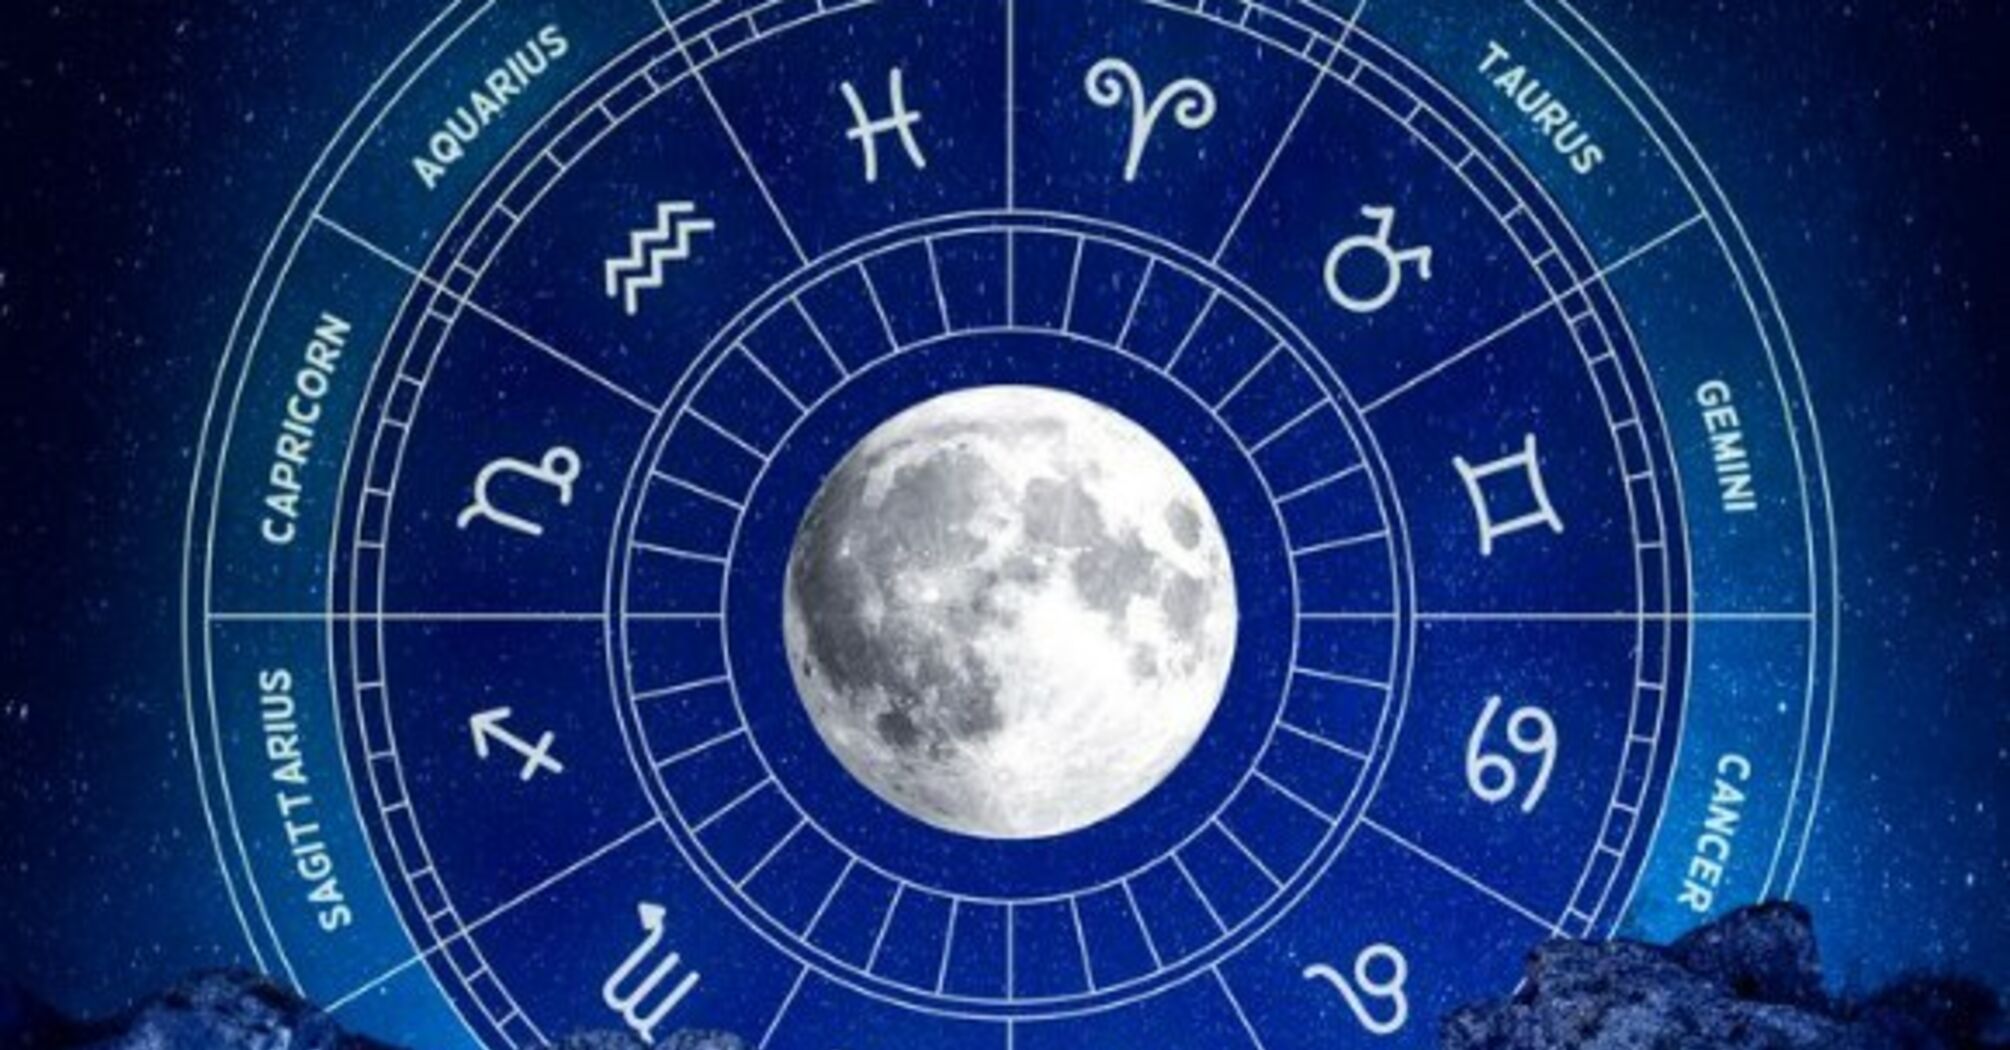 These zodiac signs will encounter good luck in their careers next week